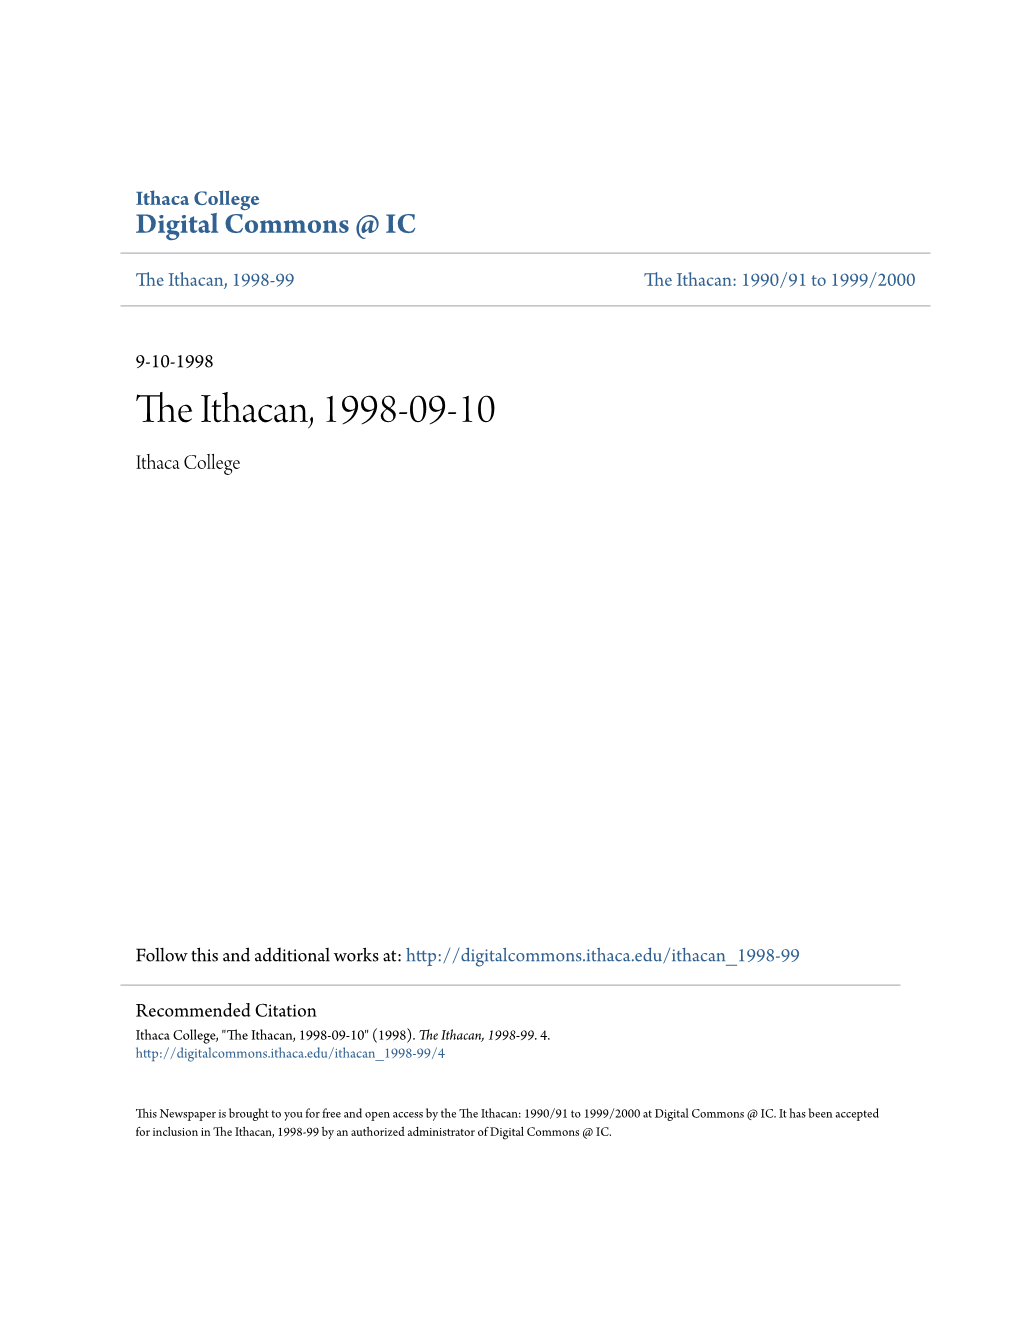 The Ithacan, 1998-09-10